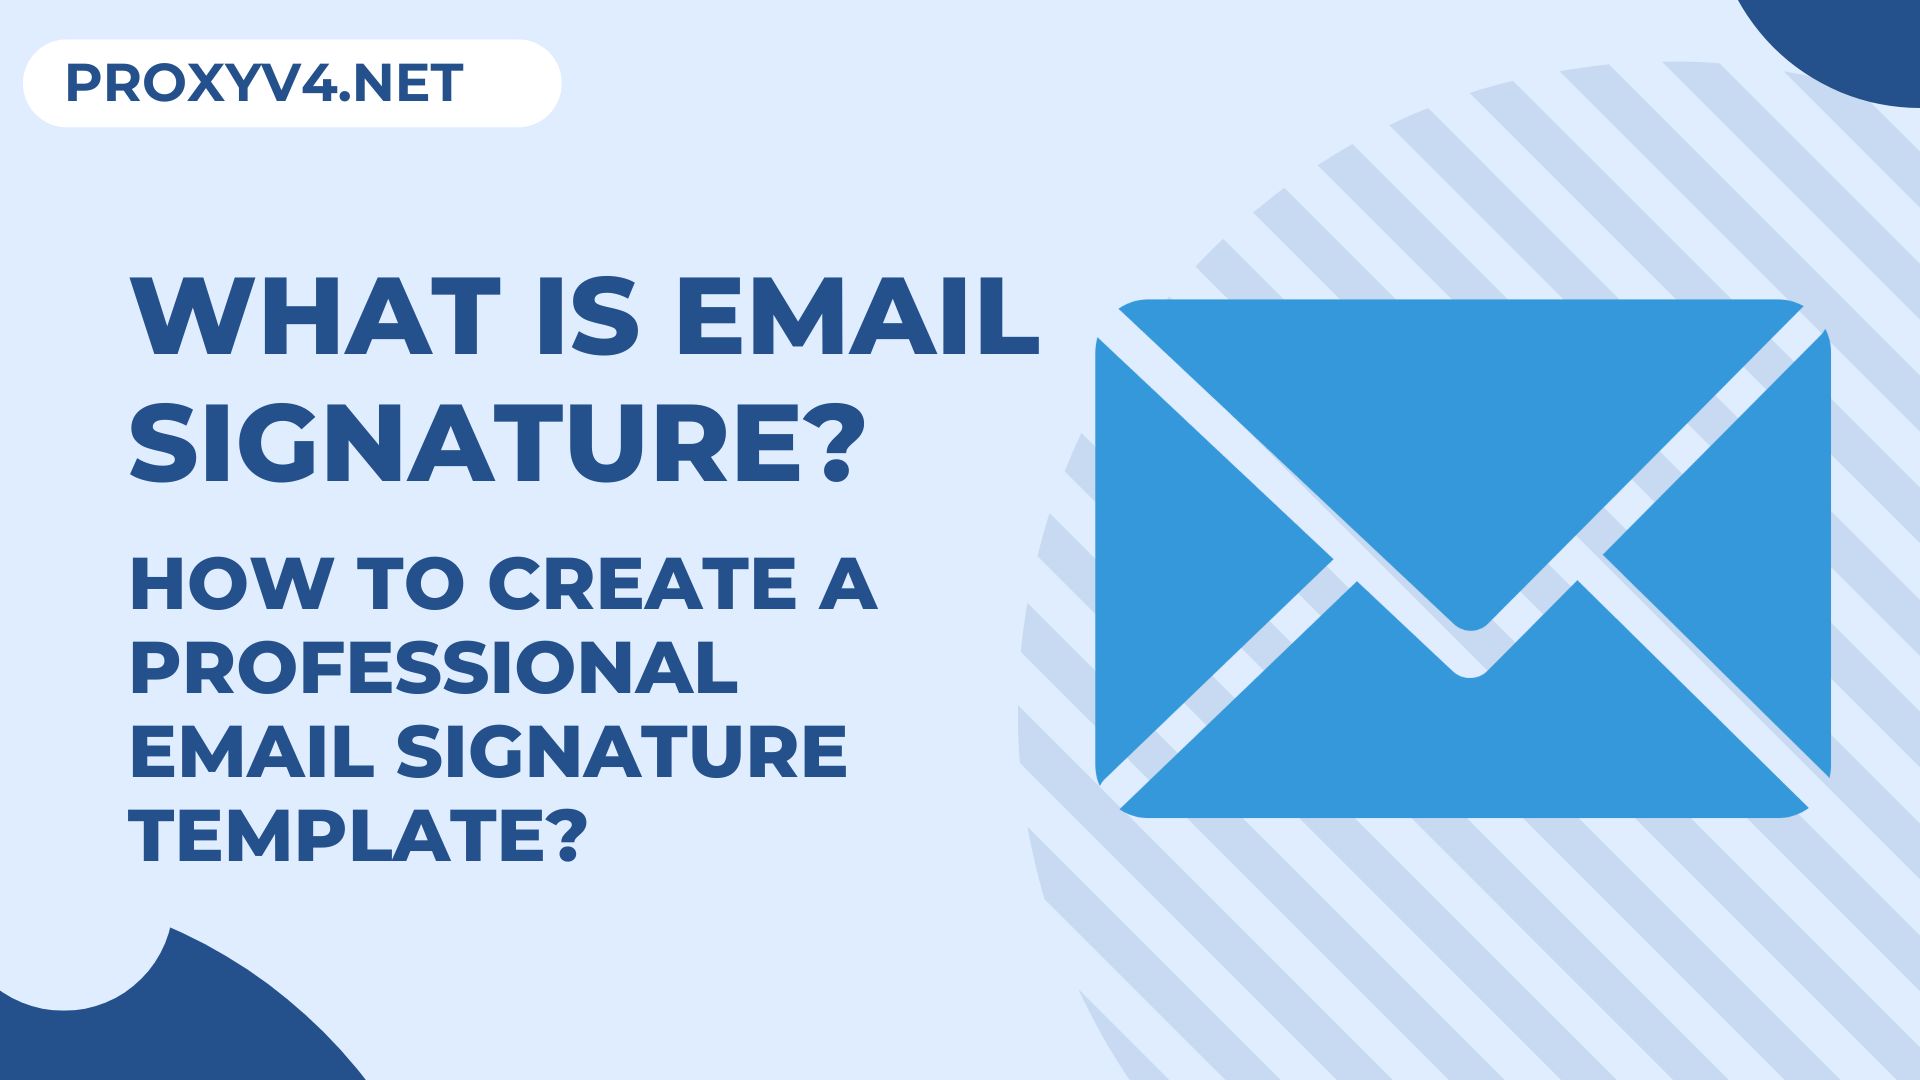 What is email signature? How to create a professional email signature template